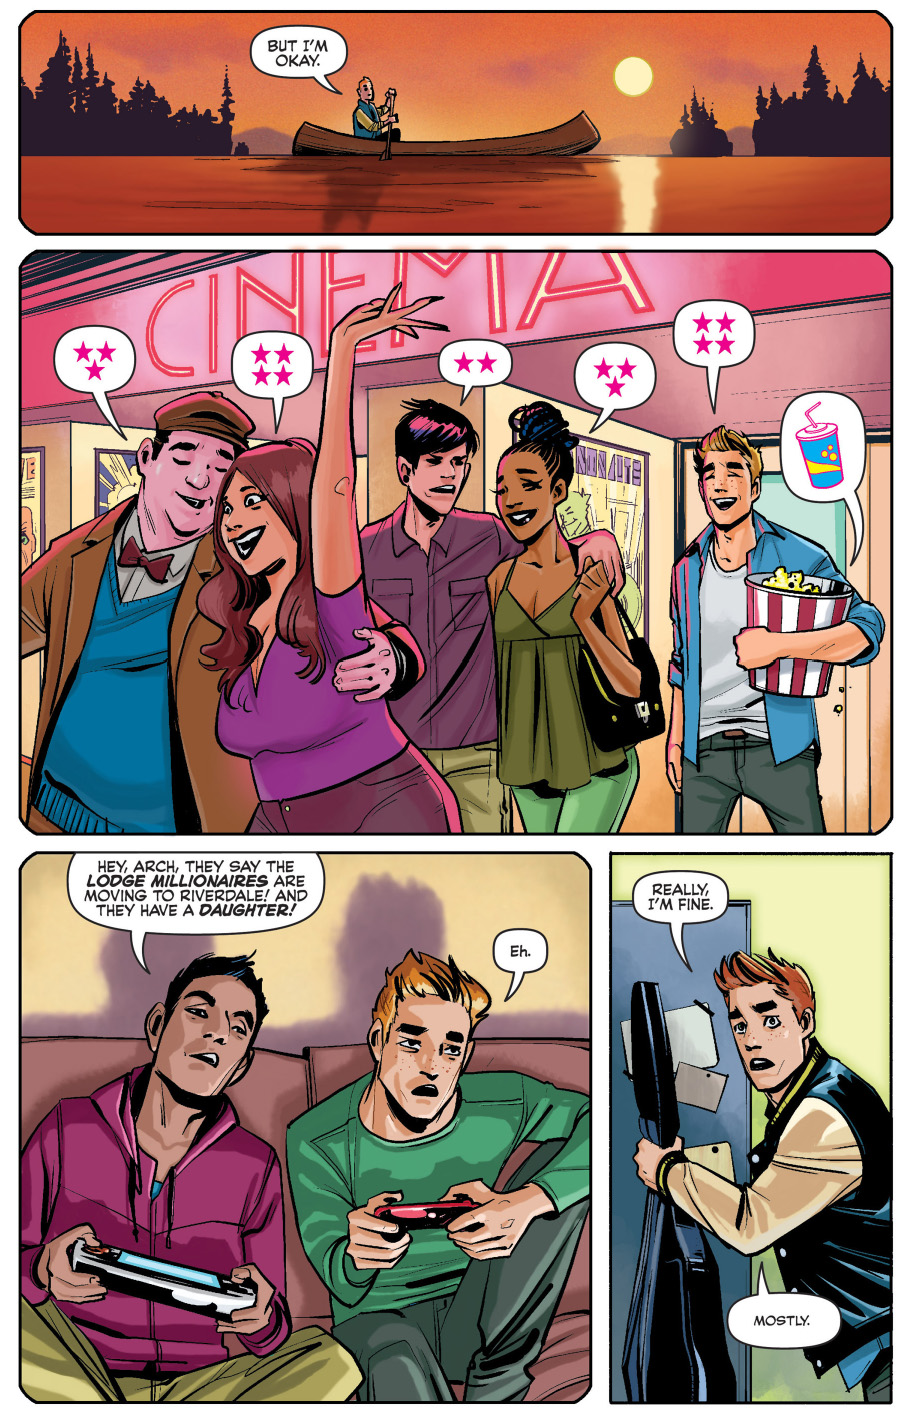 archie and betty break up